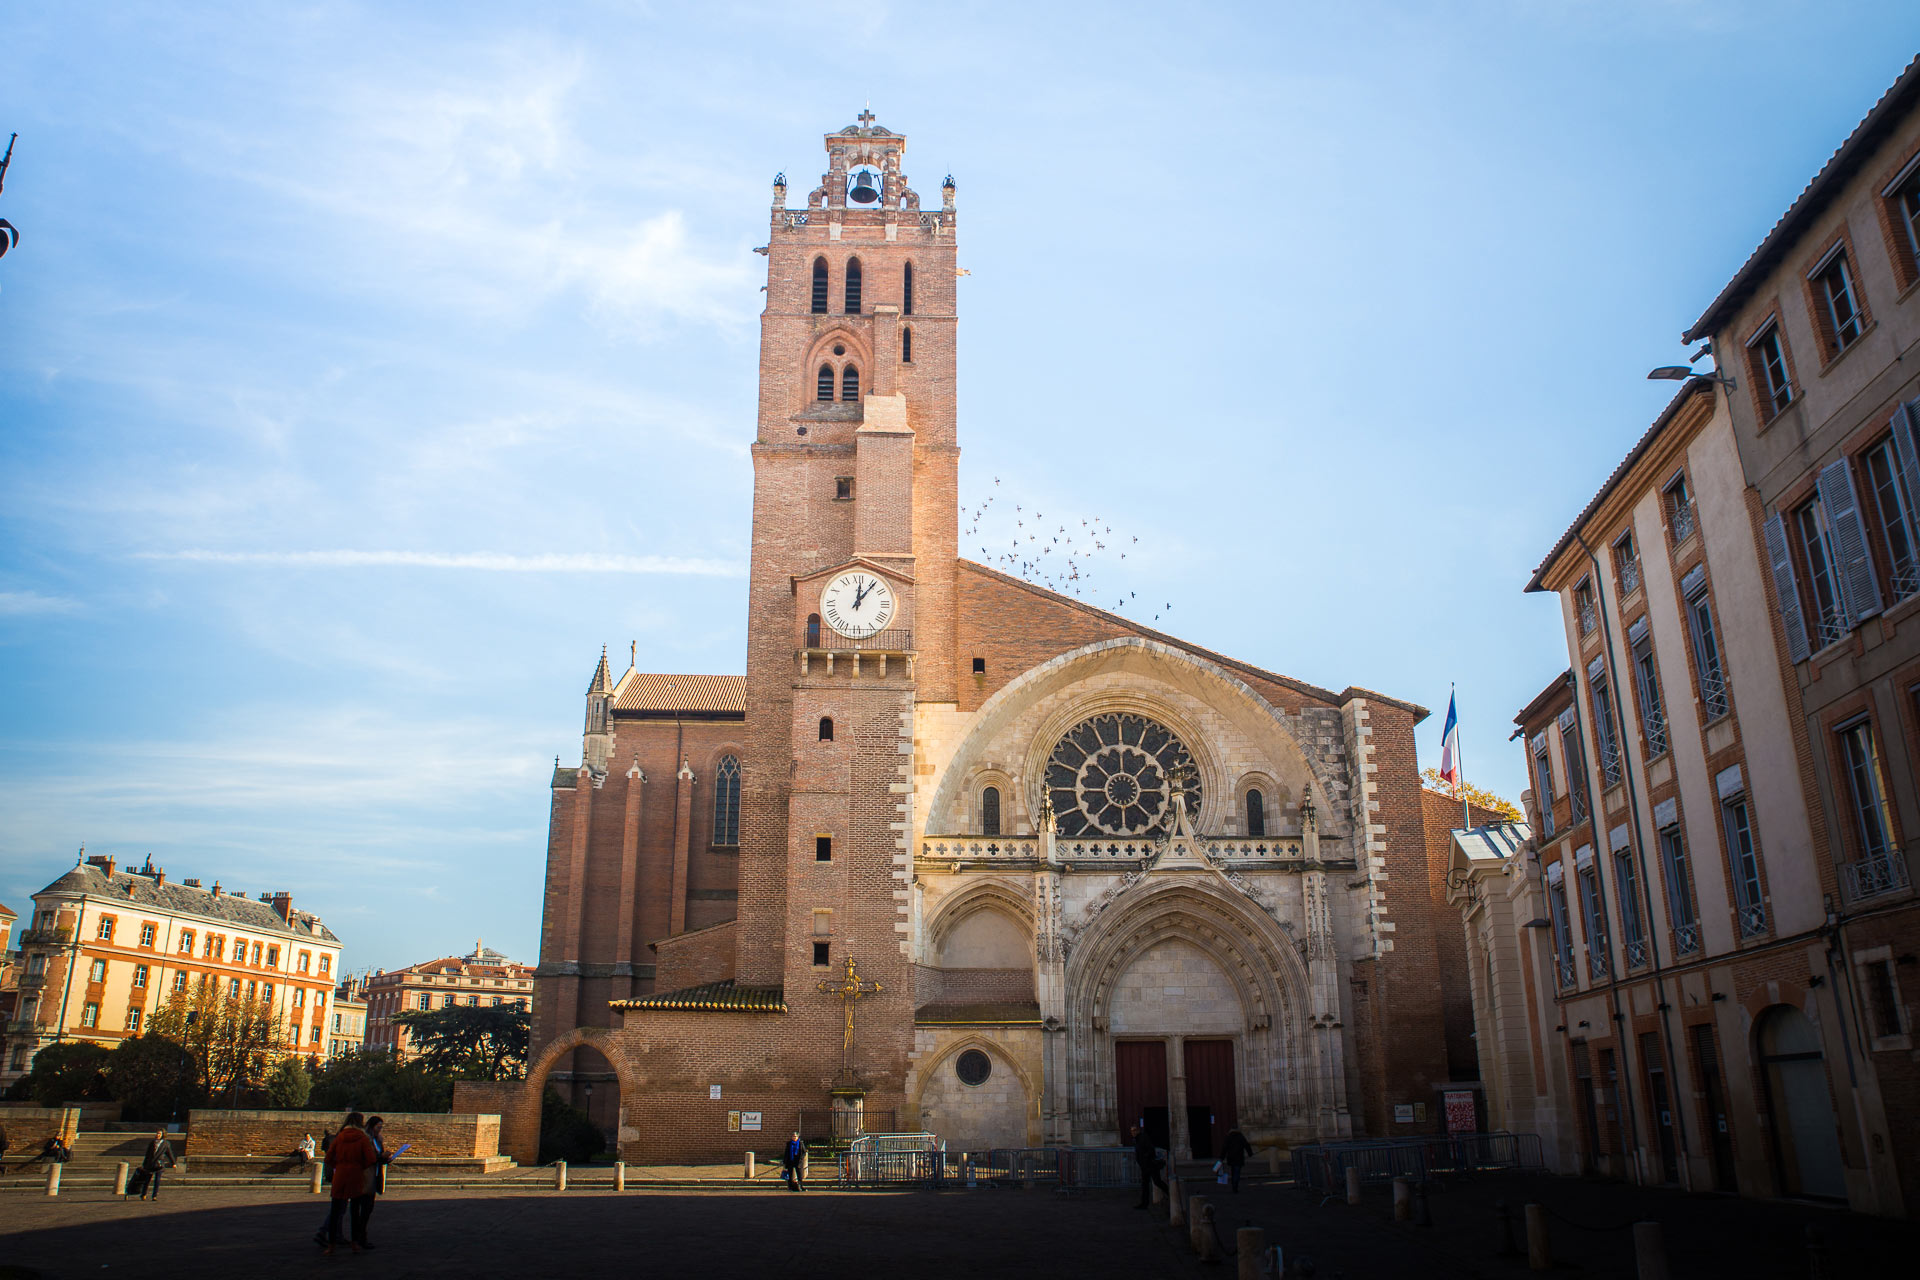 The Saint-Etienne Cathedral of Toulouse - 3 days in Toulouse itinerary